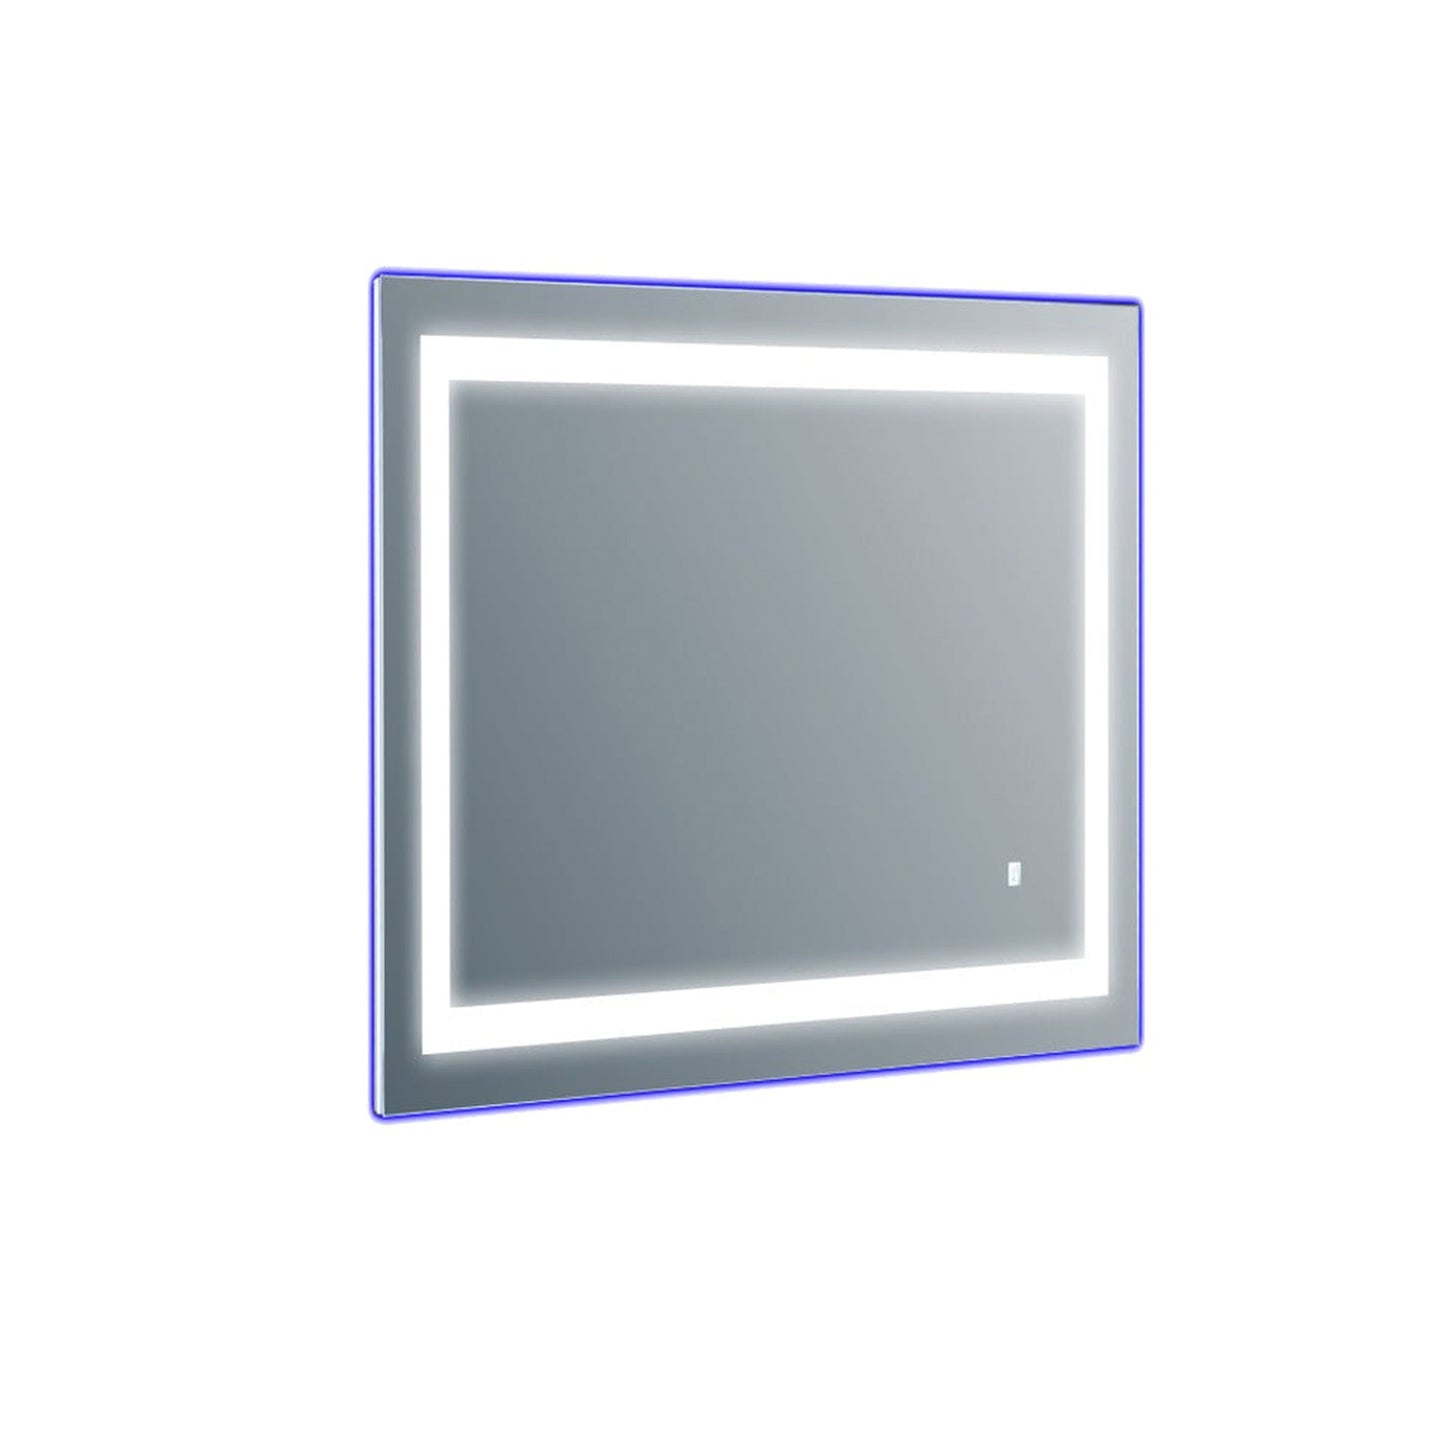 Eviva Deco Piece 20" x 28" Wall Mounted Bathroom Vanity Mirror with Backlit LED and Frame Lights